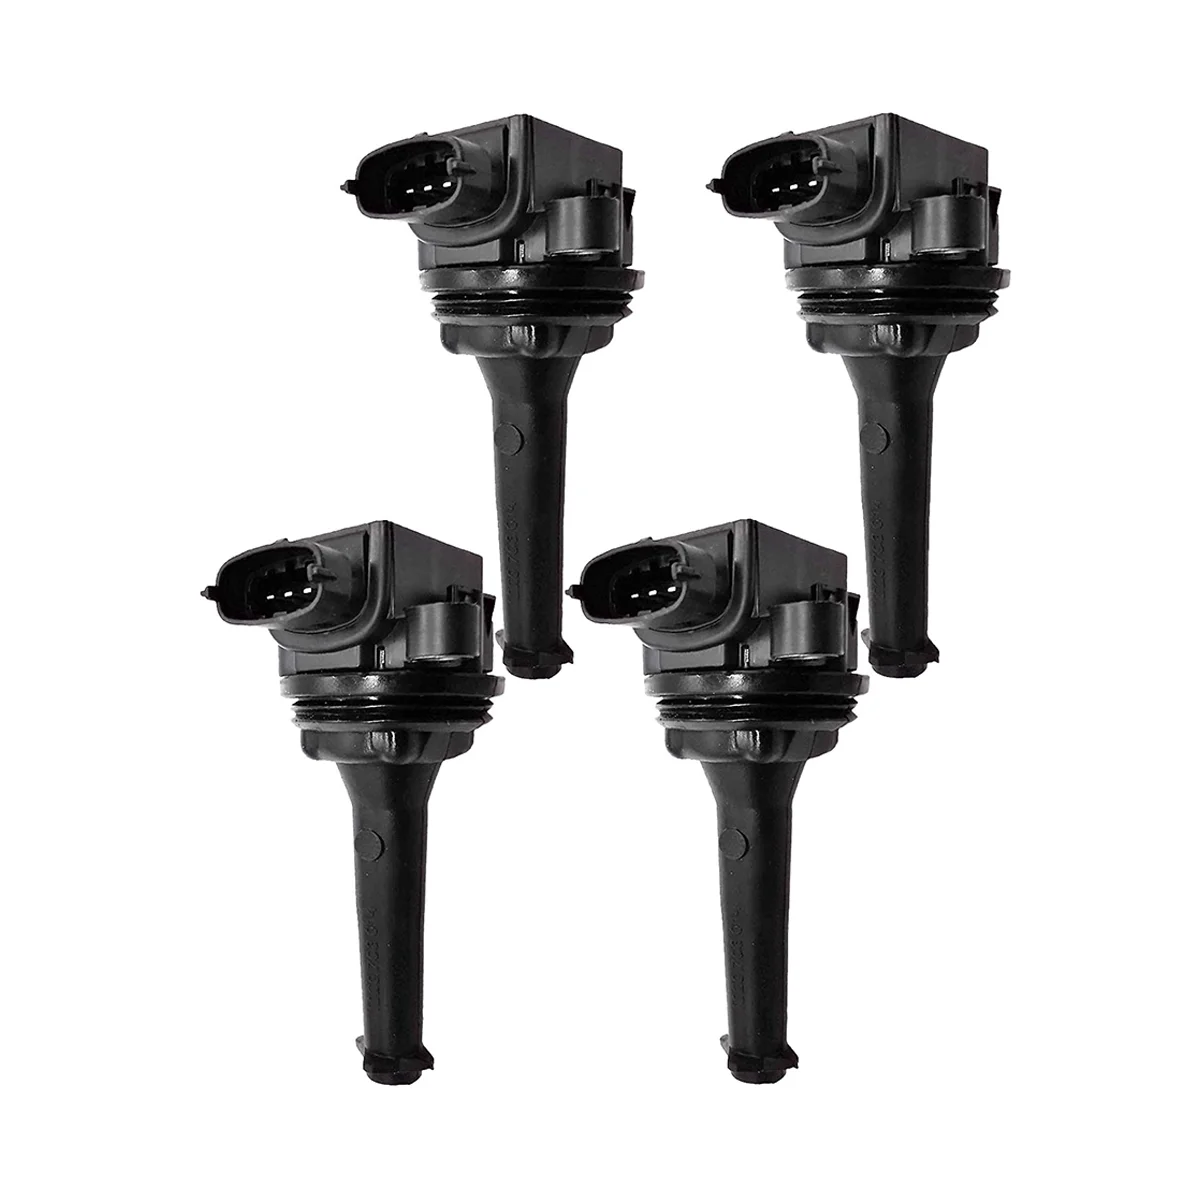 

4 PCS Car Ignition Coil Fit 30713416 9125601 for Volvo C70 S60 S70 S80 V70 XC70 XC90 2.0 2.3 2.4 2.5 T5